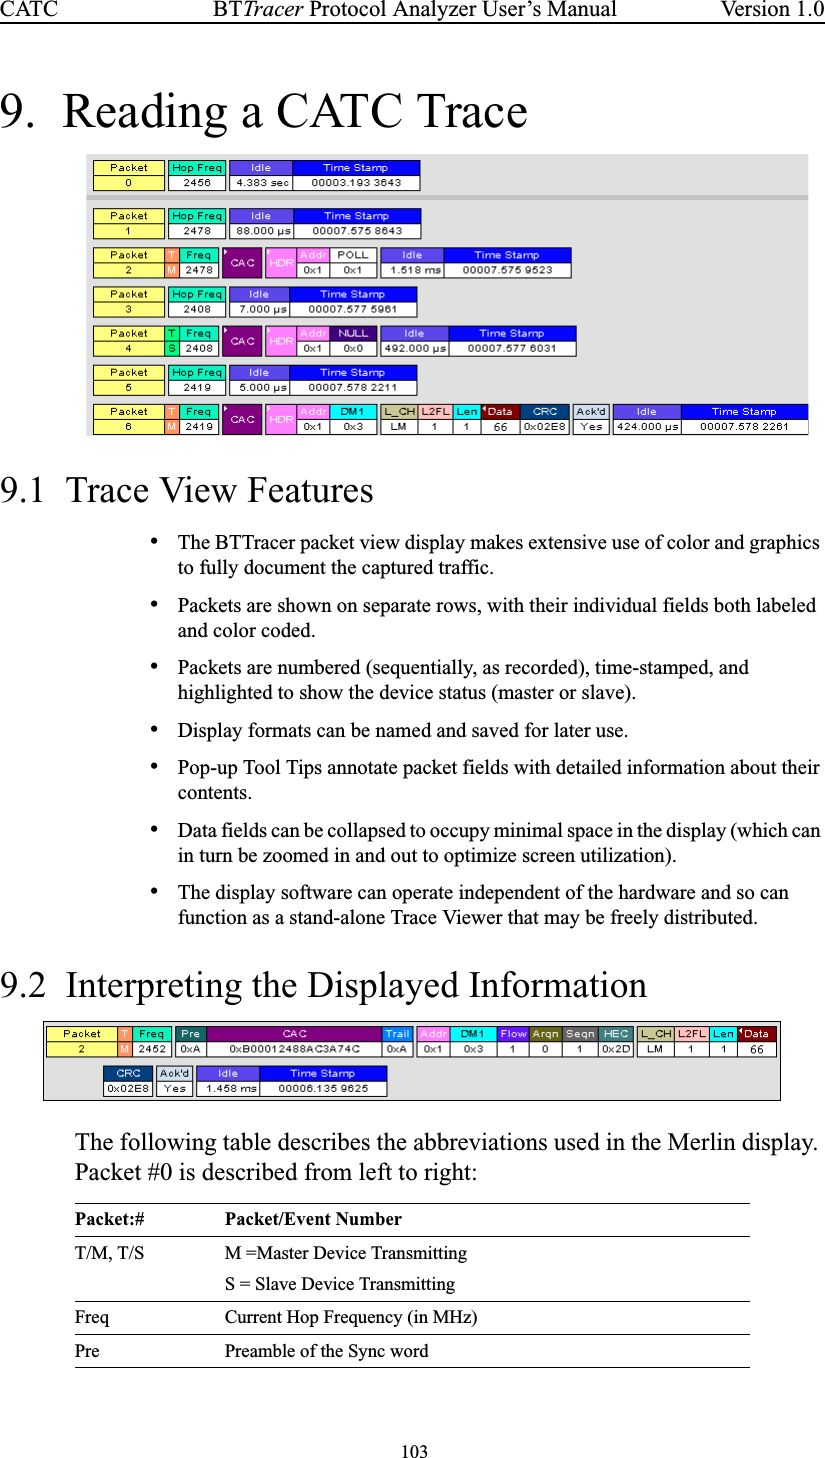 103BTTracer Protocol Analyzer User’s ManualCATC Version 1.09. Reading a CATC Trace9.1 Trace View Features•The BTTracer packet view display makes extensive use of color and graphicsto fully document the captured traffic.•Packets are shown on separate rows, with their individual fields both labeledand color coded.•Packets are numbered (sequentially, as recorded), time-stamped, andhighlighted to show the device status (master or slave).•Display formats can be named and saved for later use.•Pop-up Tool Tips annotate packet fields with detailed information about theircontents.•Data fields can be collapsed to occupy minimal space in the display (which canin turn be zoomed in and out to optimize screen utilization).•The display software can operate independent of the hardware and so canfunction as a stand-alone Trace Viewer that may be freely distributed.9.2 Interpreting the Displayed InformationThe following table describes the abbreviations used in the Merlin display.Packet #0 is described from left to right:Packet:# Packet/Event NumberT/M, T/S M =Master Device TransmittingS = Slave Device TransmittingFreq Current Hop Frequency (in MHz)Pre Preamble of the Sync word